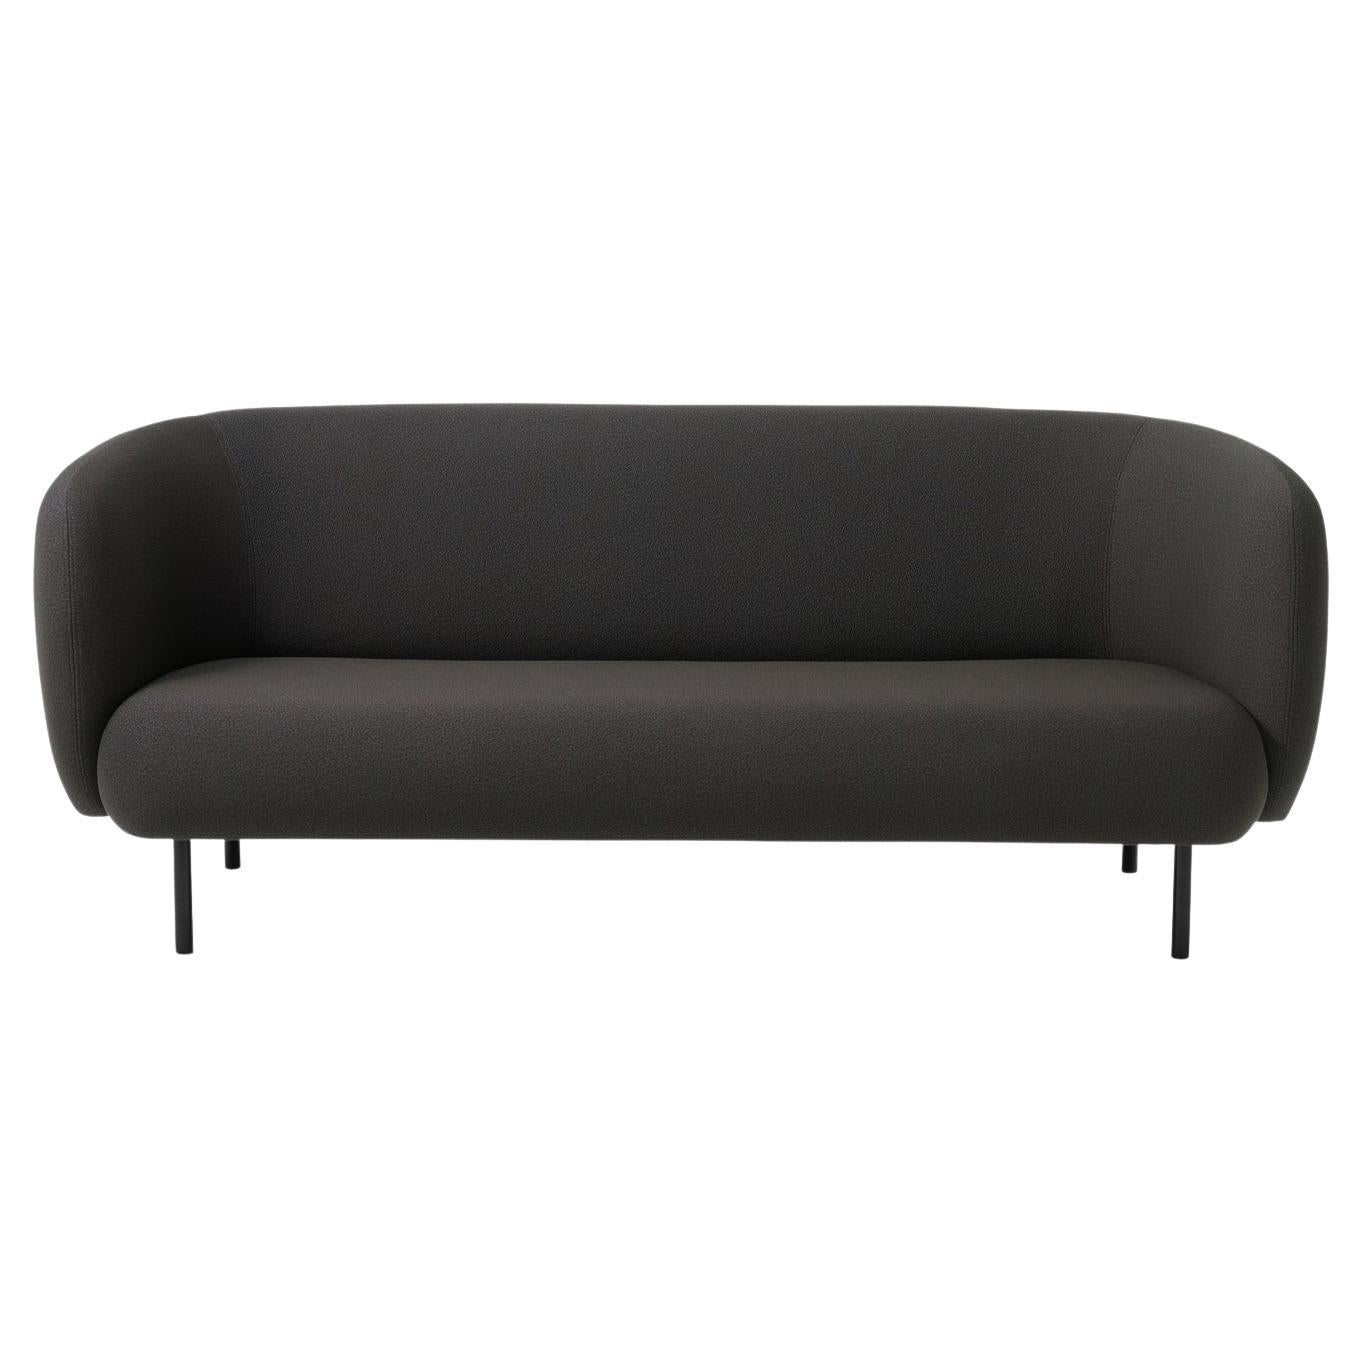 Caper 3 Seater Sprinkles Mocca by Warm Nordic